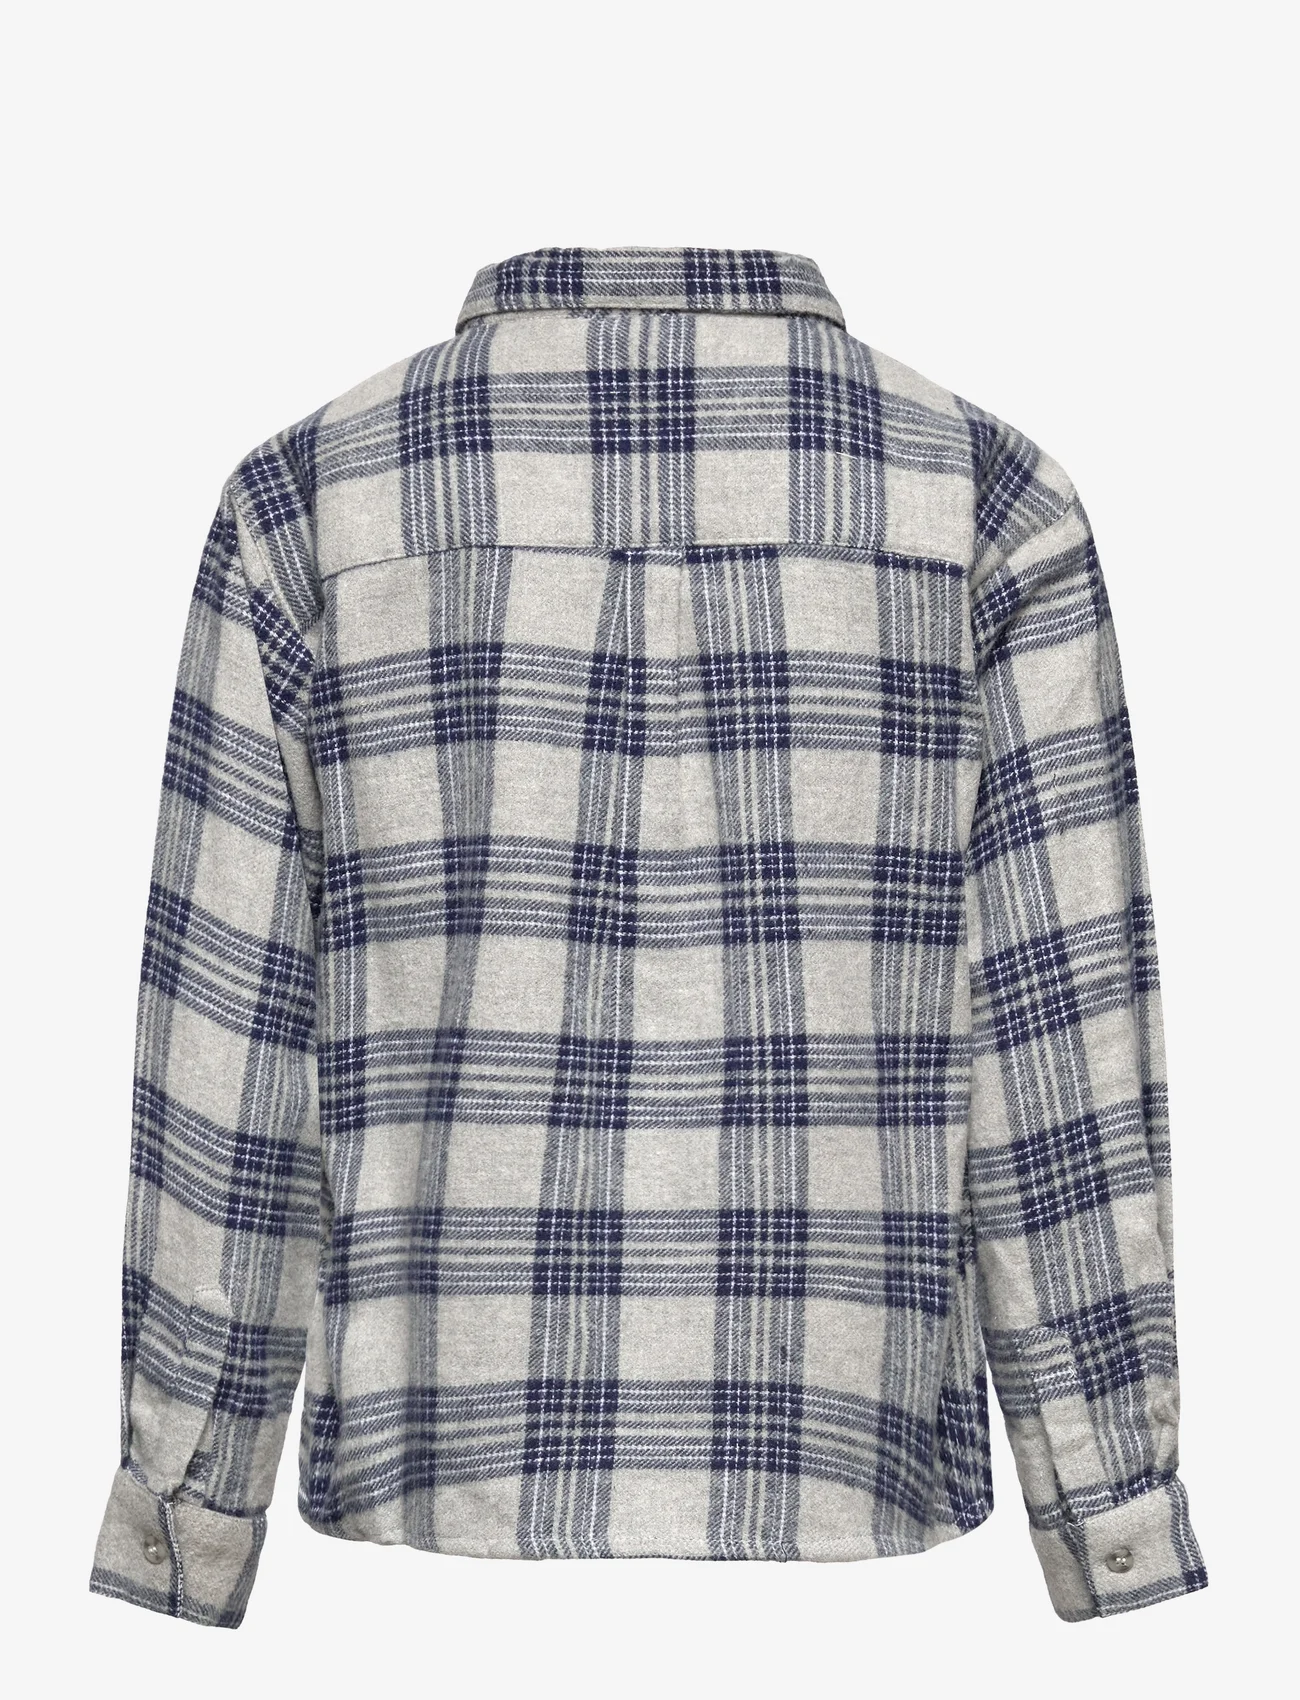 Sofie Schnoor Baby and Kids - Shirt - long-sleeved shirts - grey check - 1